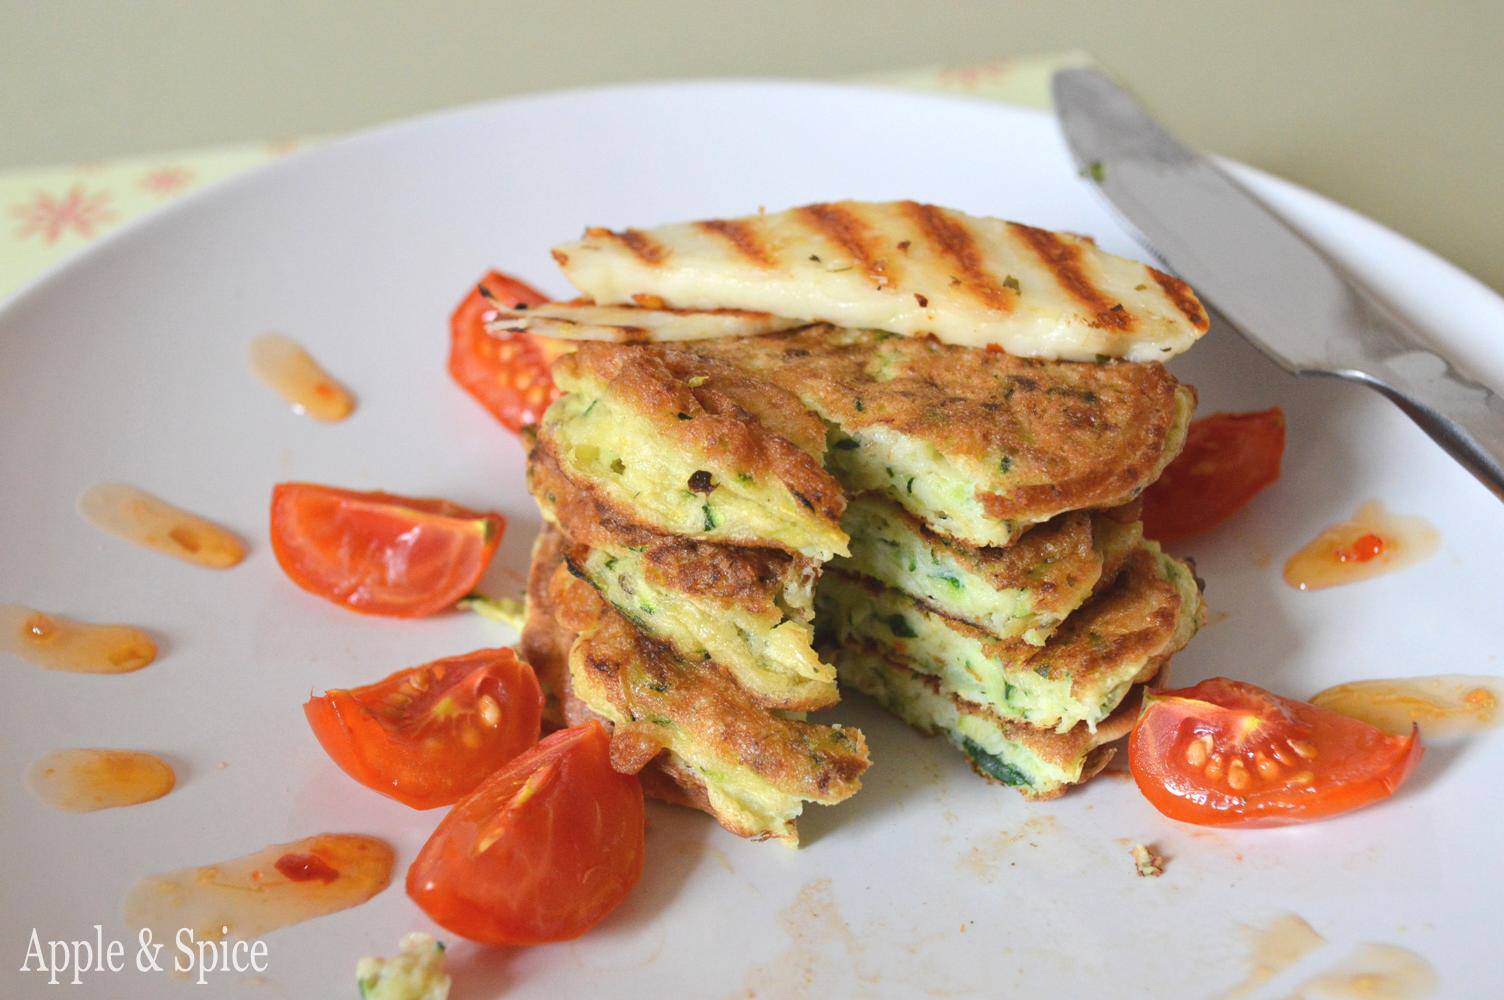 Apple & Spice: Courgette Fritters with Griddled Halloumi